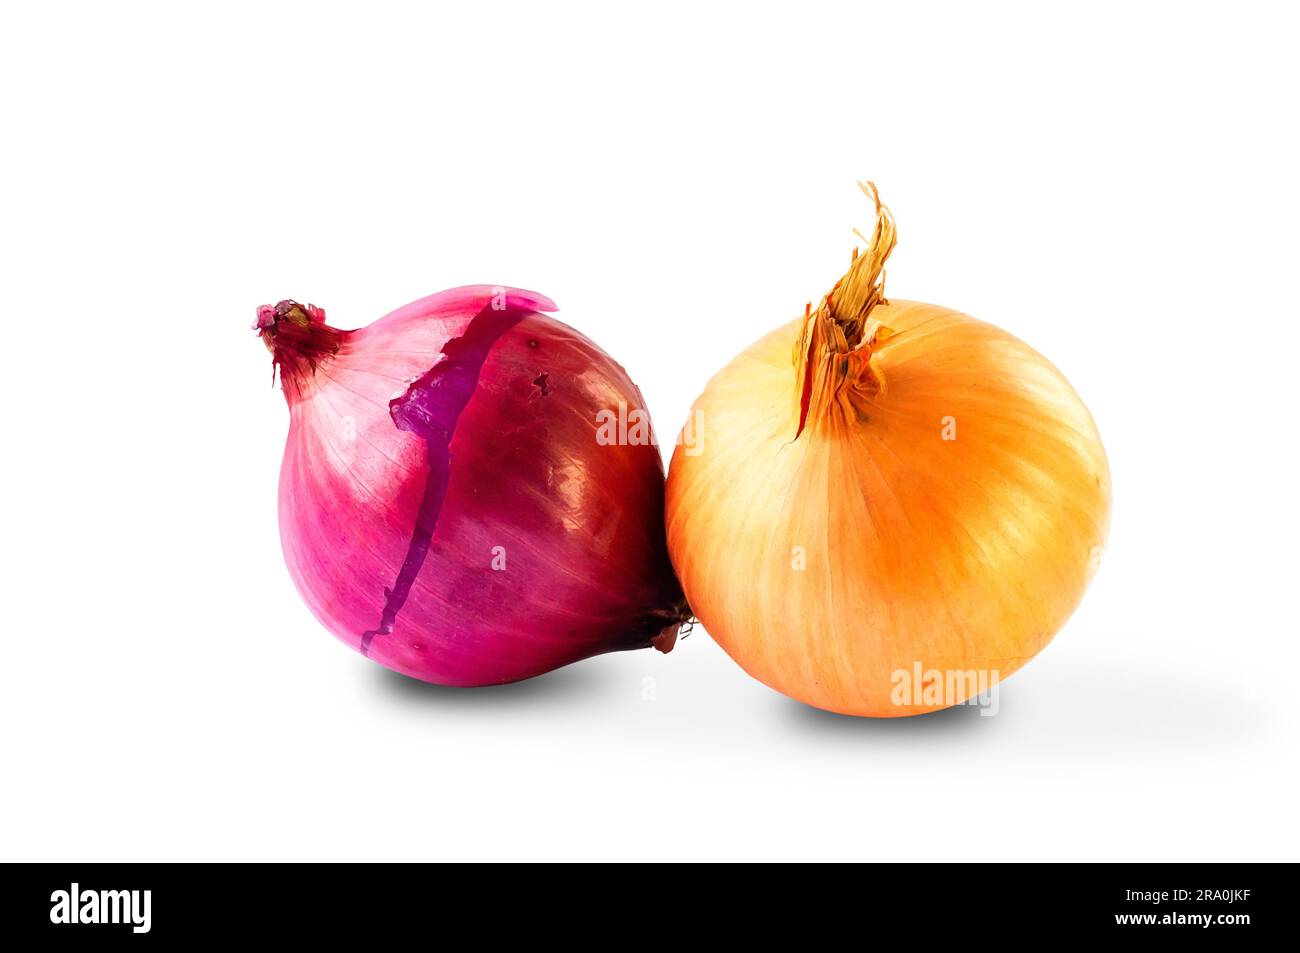 A red and a yellow onion on white background Stock Photo